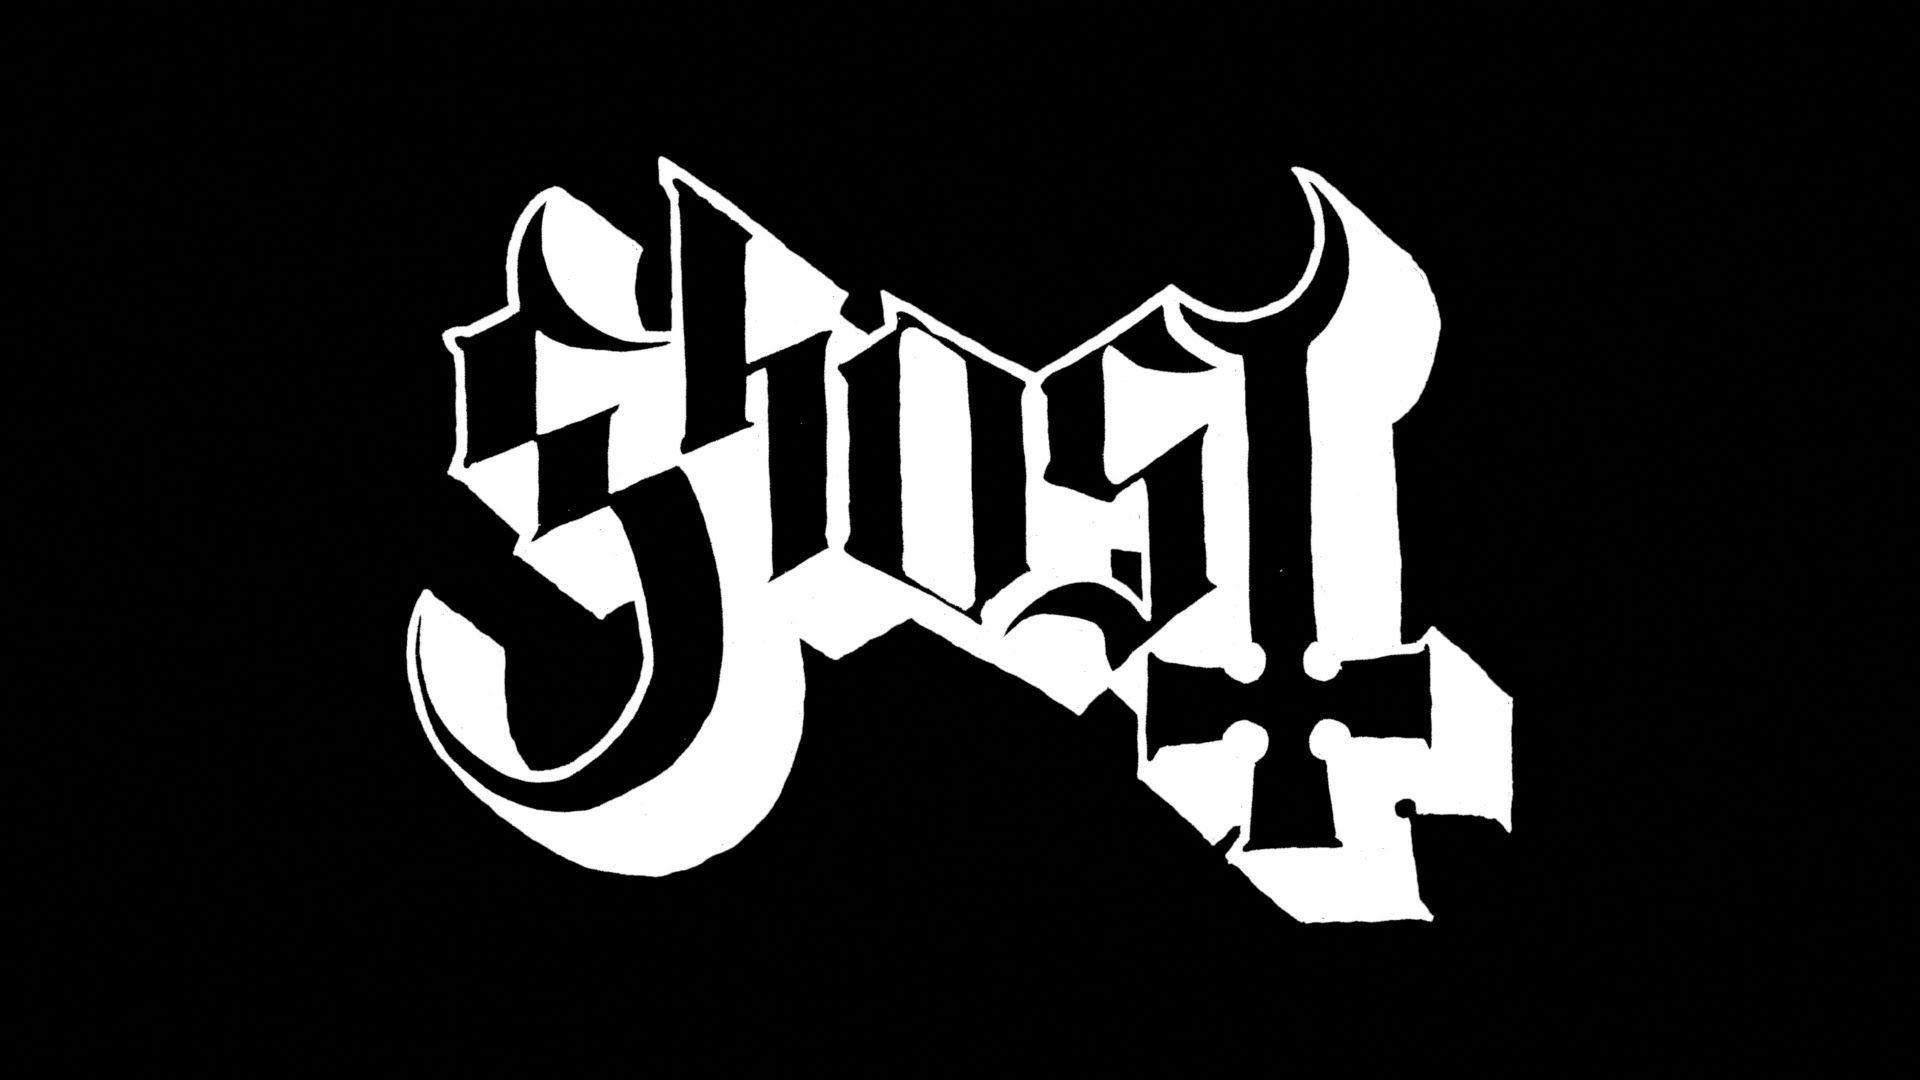 Ghost Logo - Pin by Ominous Code on Ghost | Ghost bc, Band ghost, Ghost logo